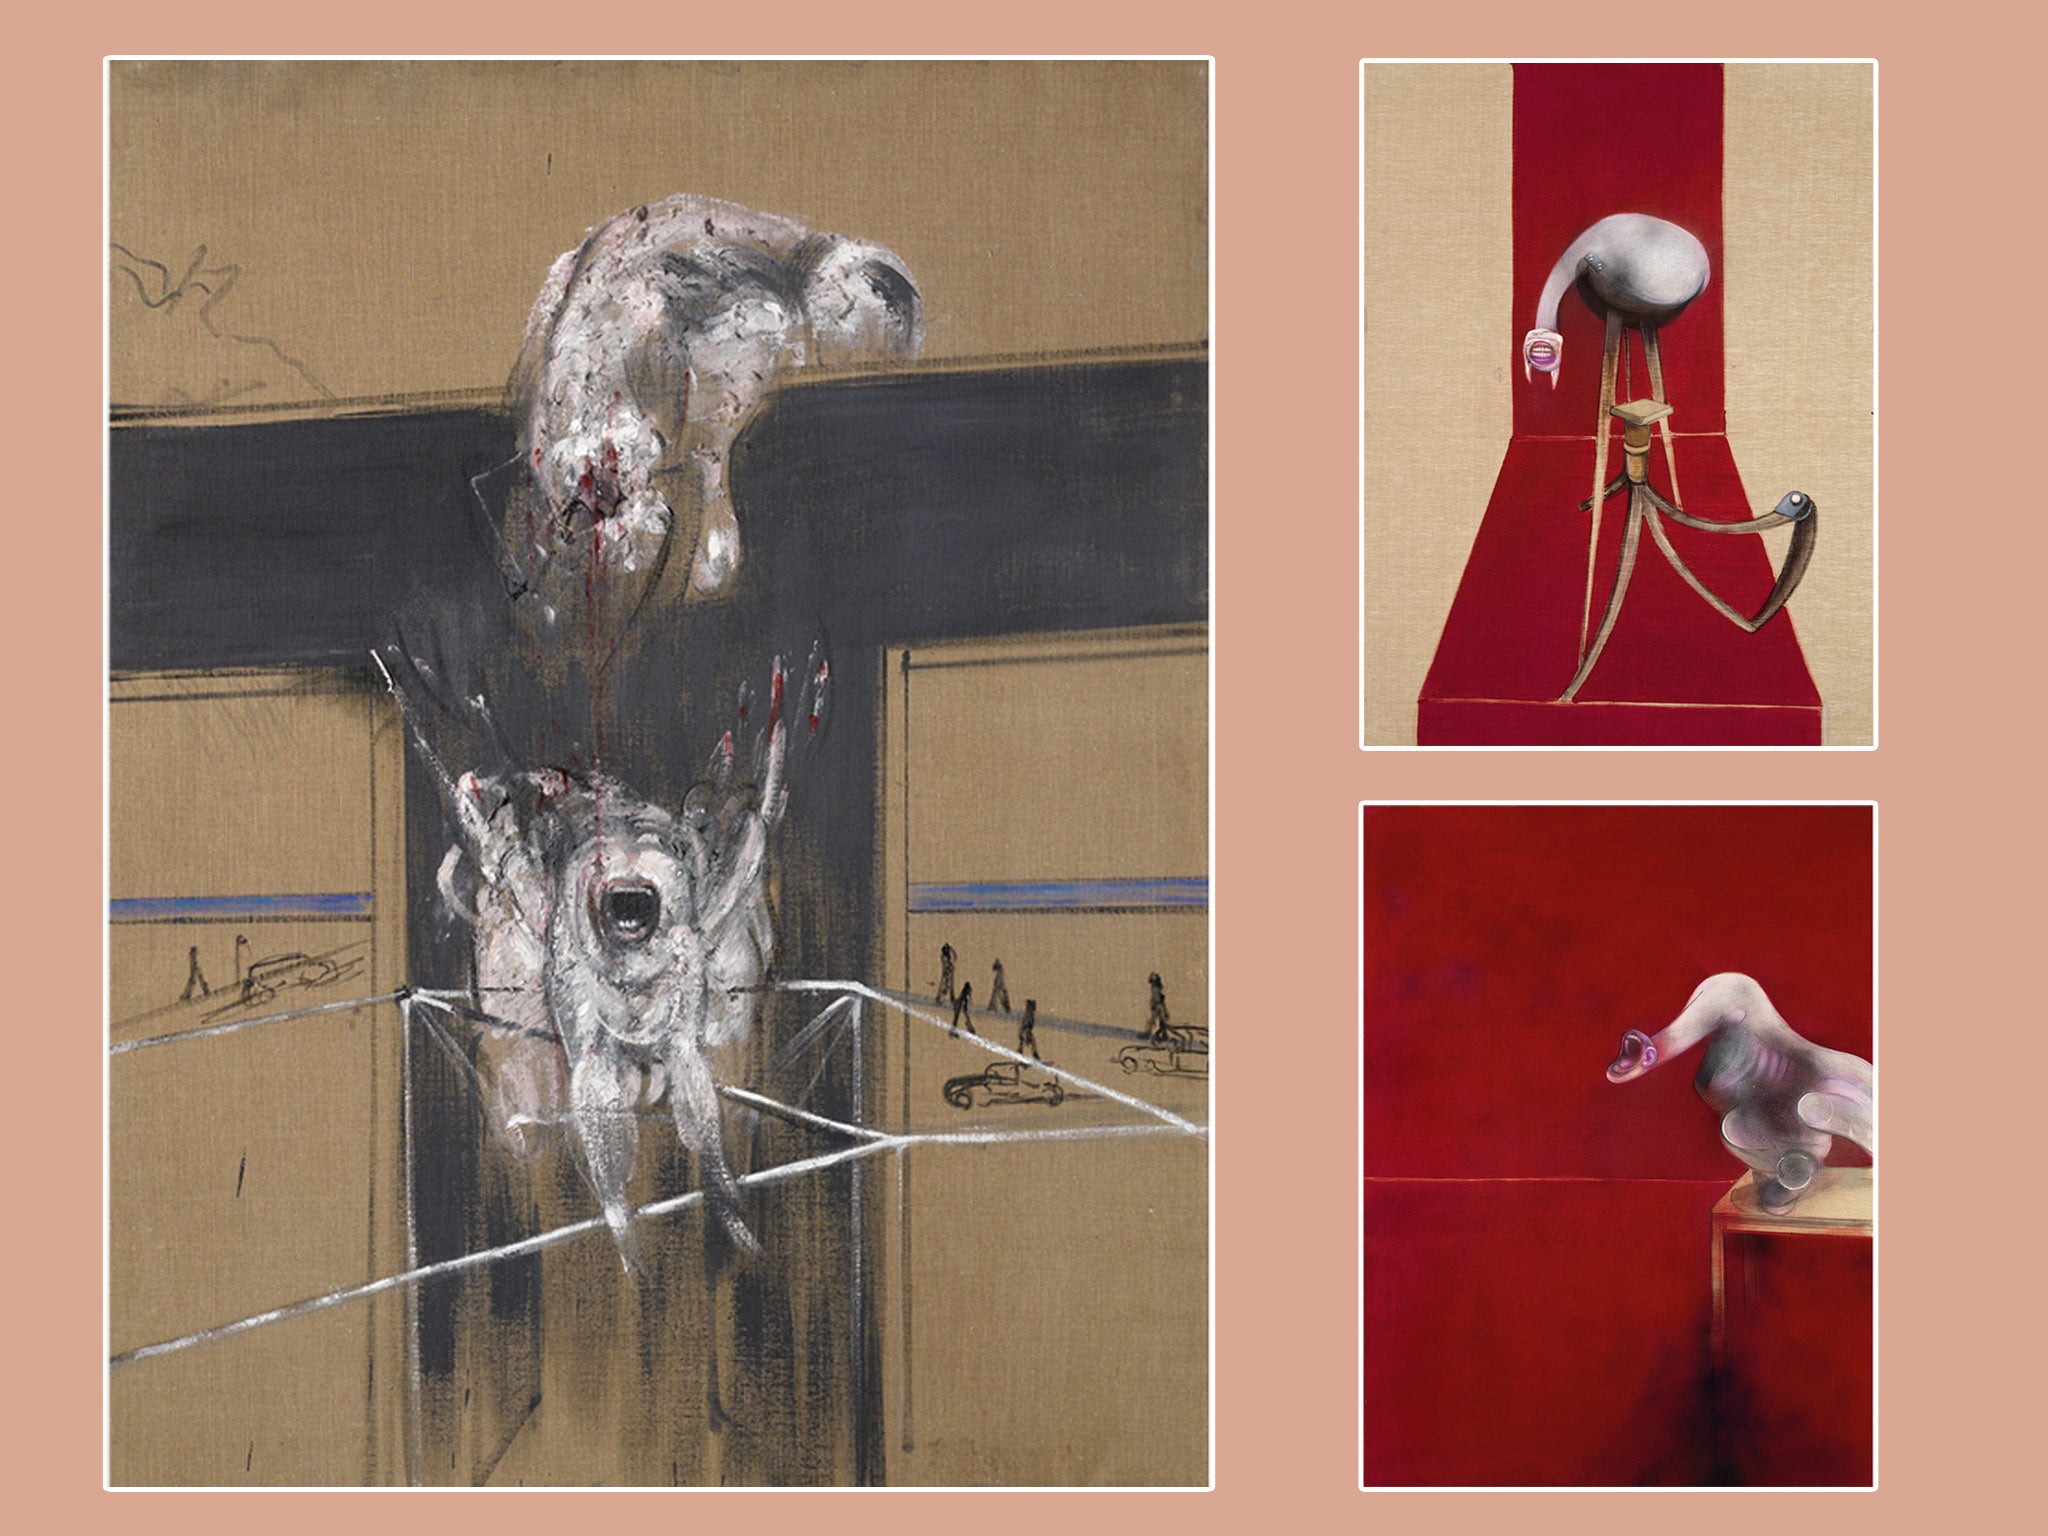 Francis Bacon’s ‘Fragment of a Crucifixion’, 1950, photo by Hugo Maertens, and ‘Second Version of Triptych 1944’, 1988, photo by Prudence Cuming Associates Ltd